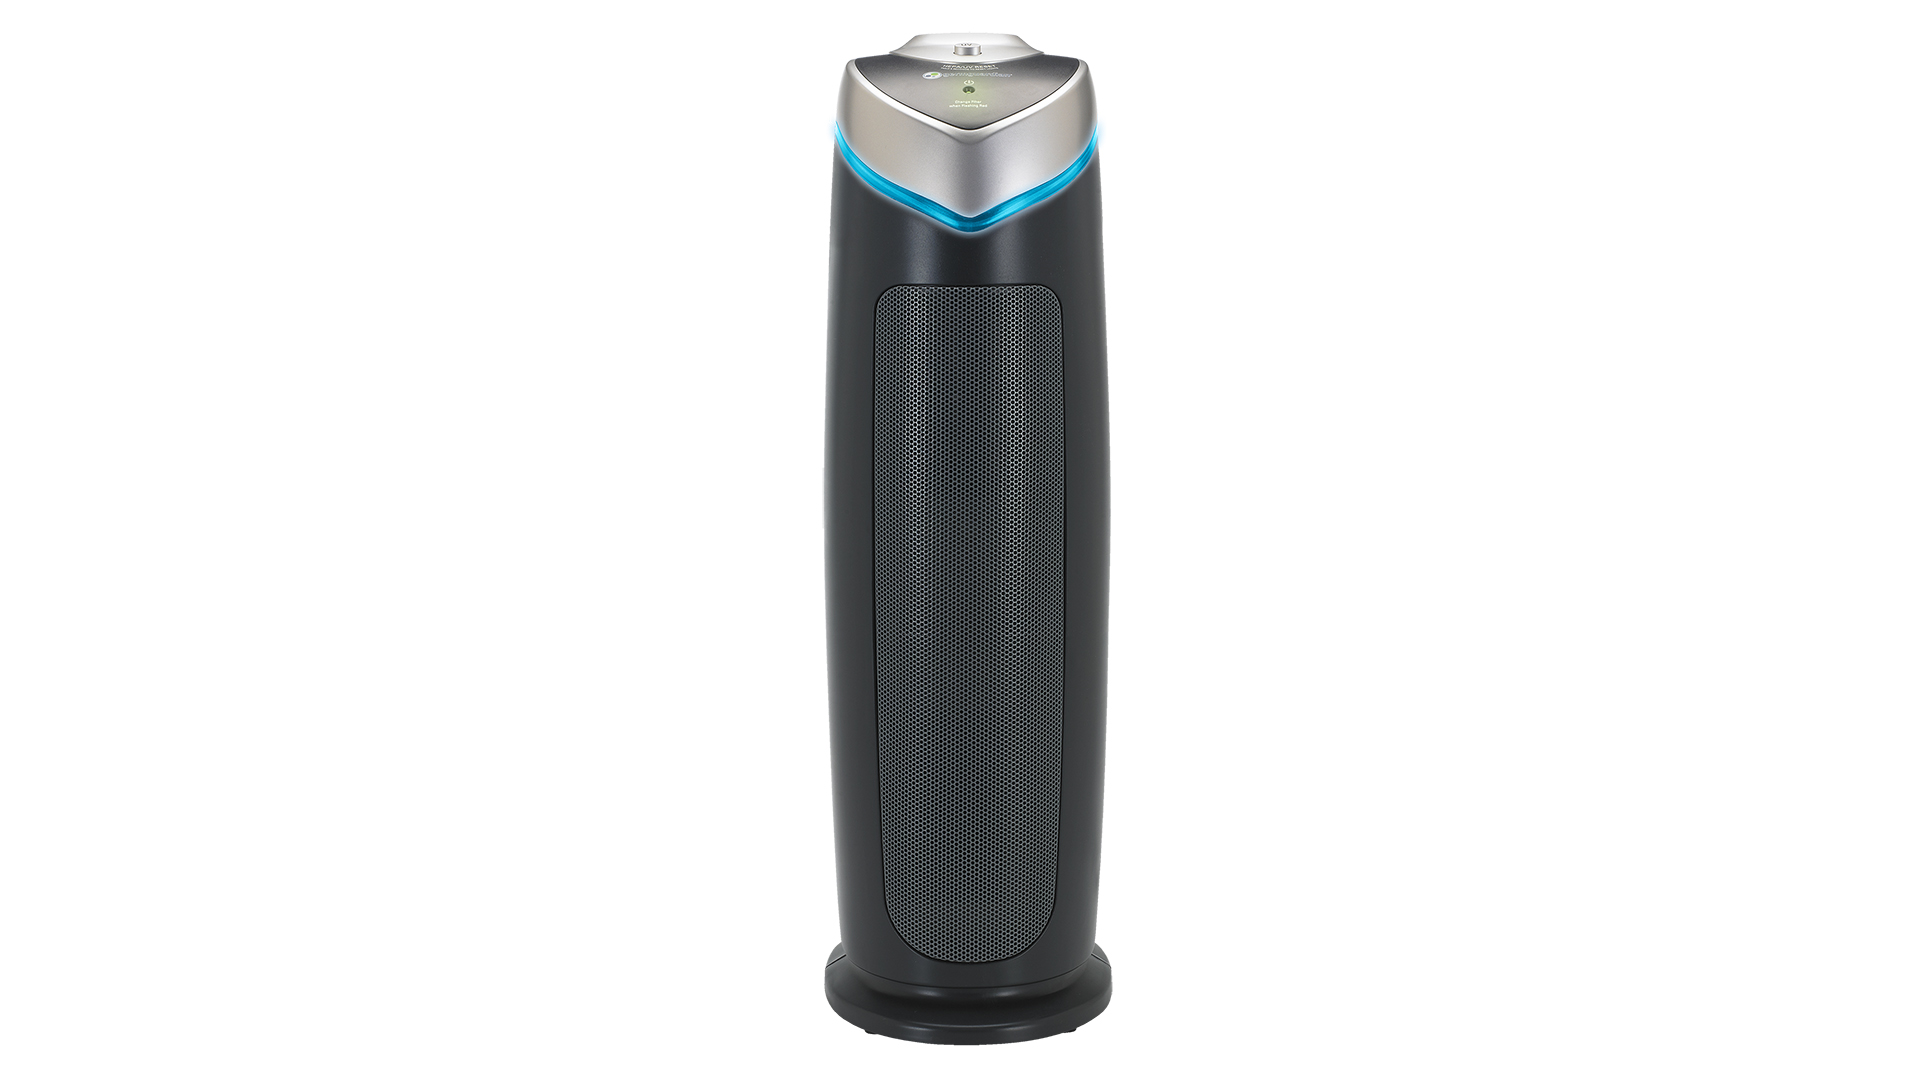 Air purifiers on sale: Product image of a GermGuardian air purifier